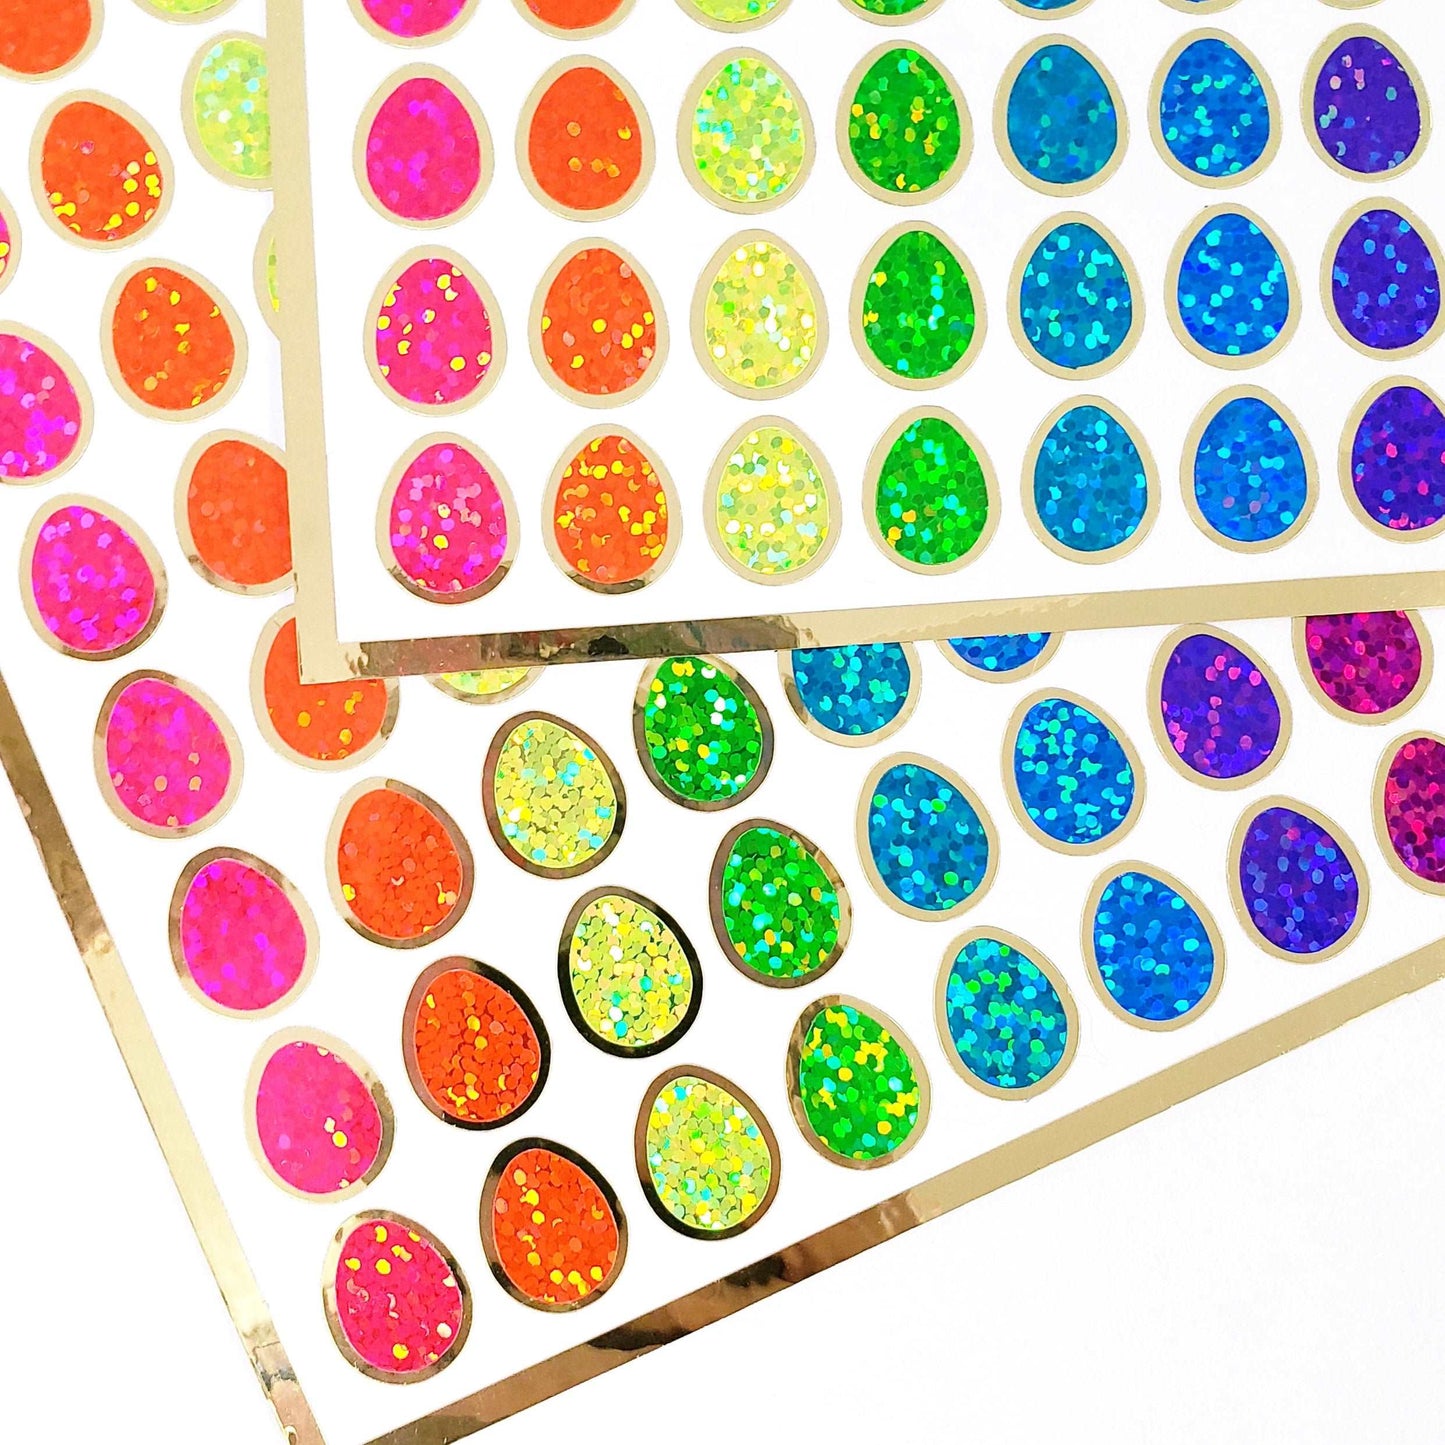 Neon and Gold Easter Egg Stickers, set of 80 small eggs for invitations, envelopes, scrapbook page embellishments, sticker gift for kids